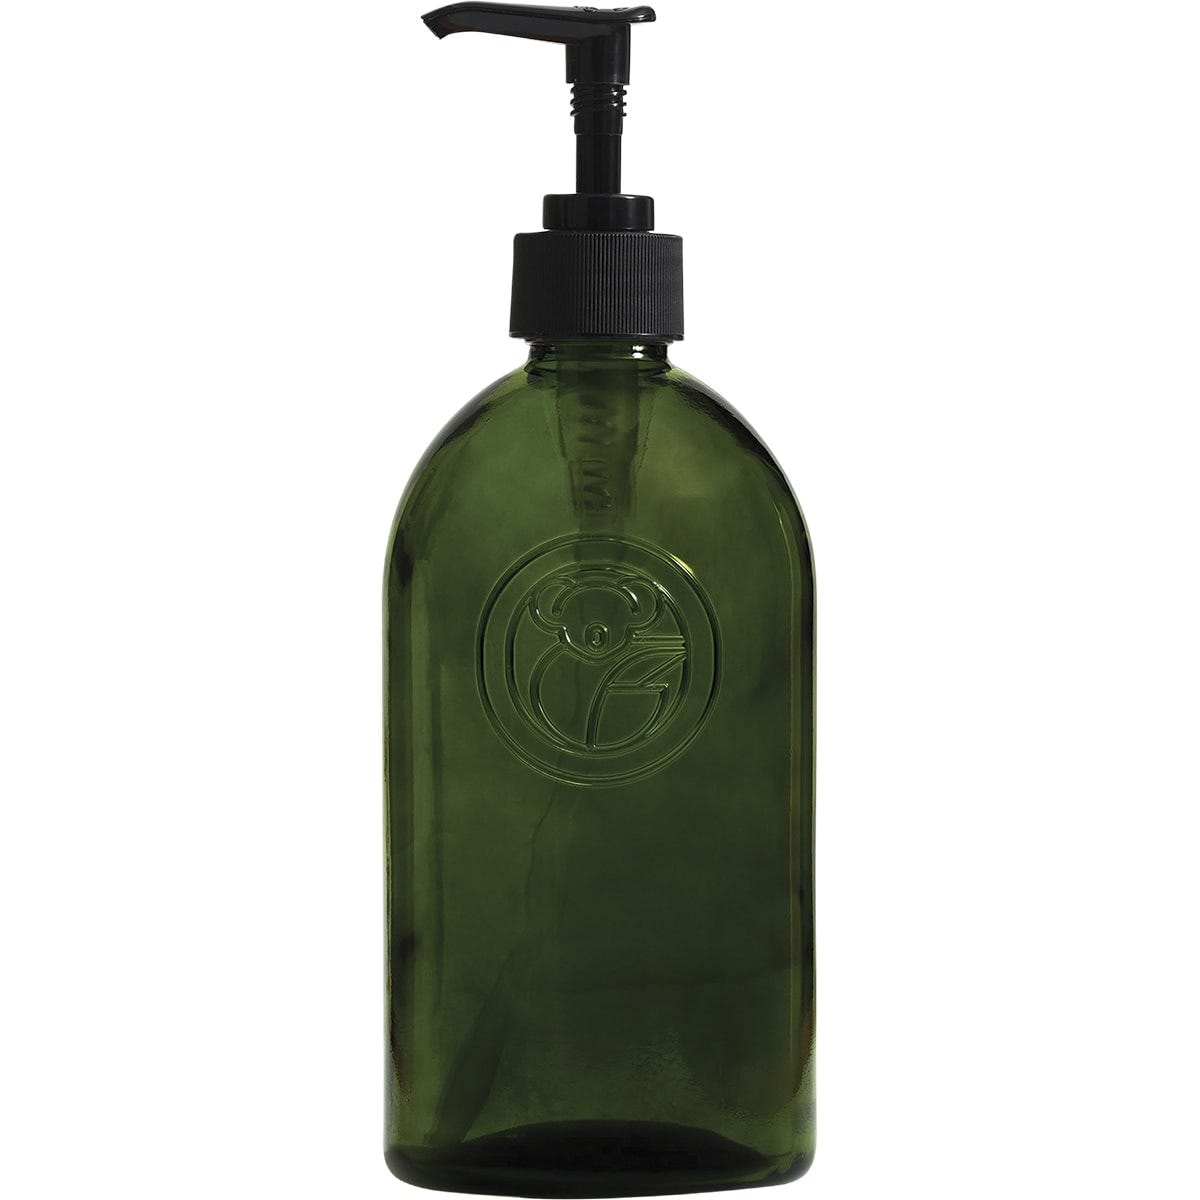 Koala Eco Apothecary Glass Bottle with Pump 500ml - Dr Earth - Cleaning